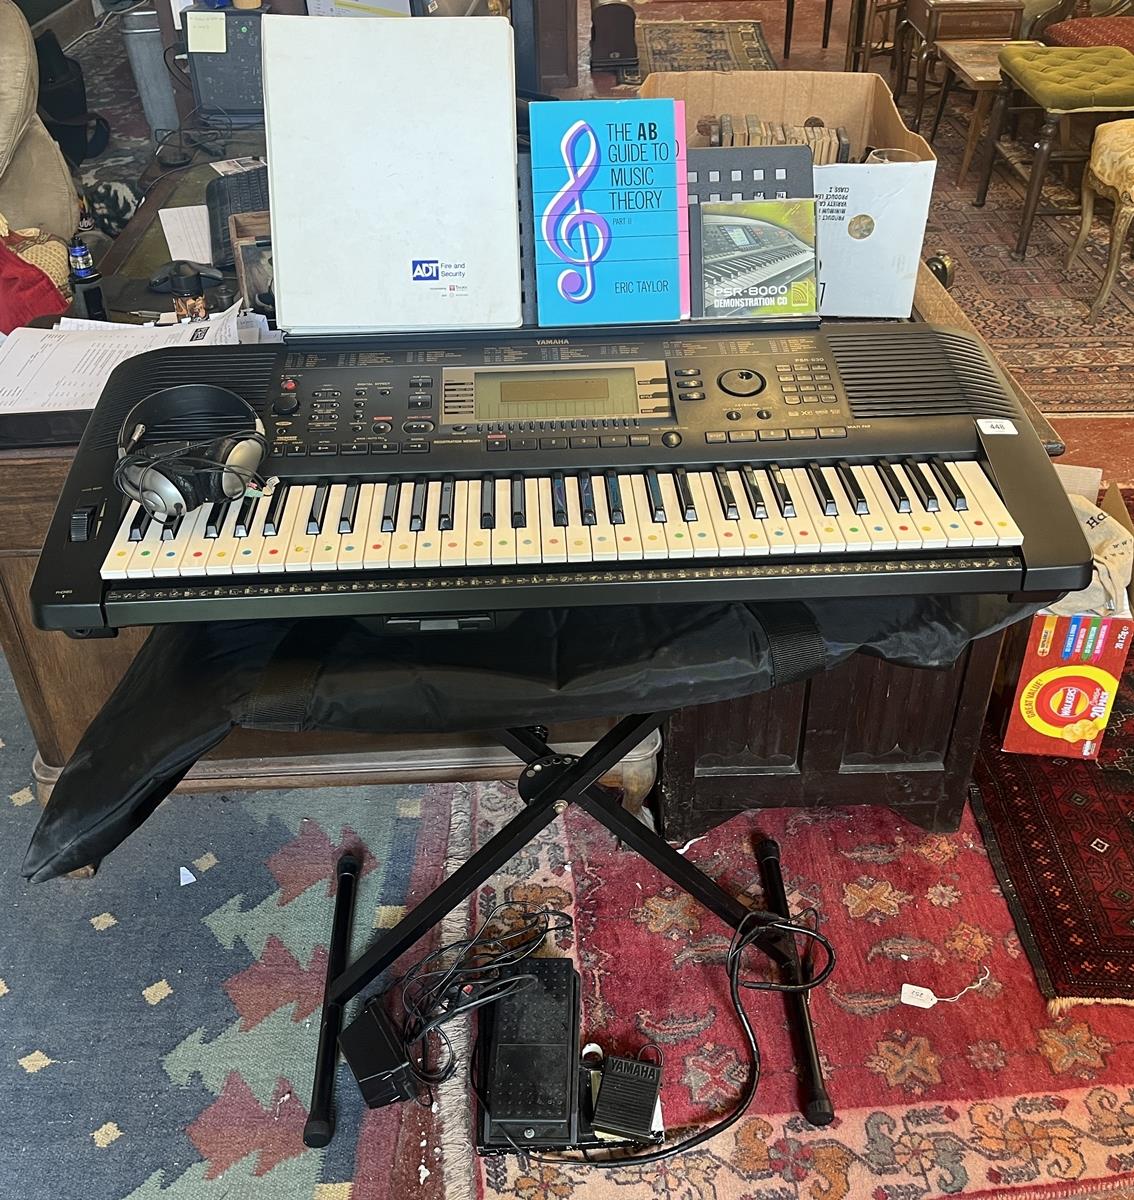 Yamaha keyboard PSR630 complete with stand, cove, instructions etc